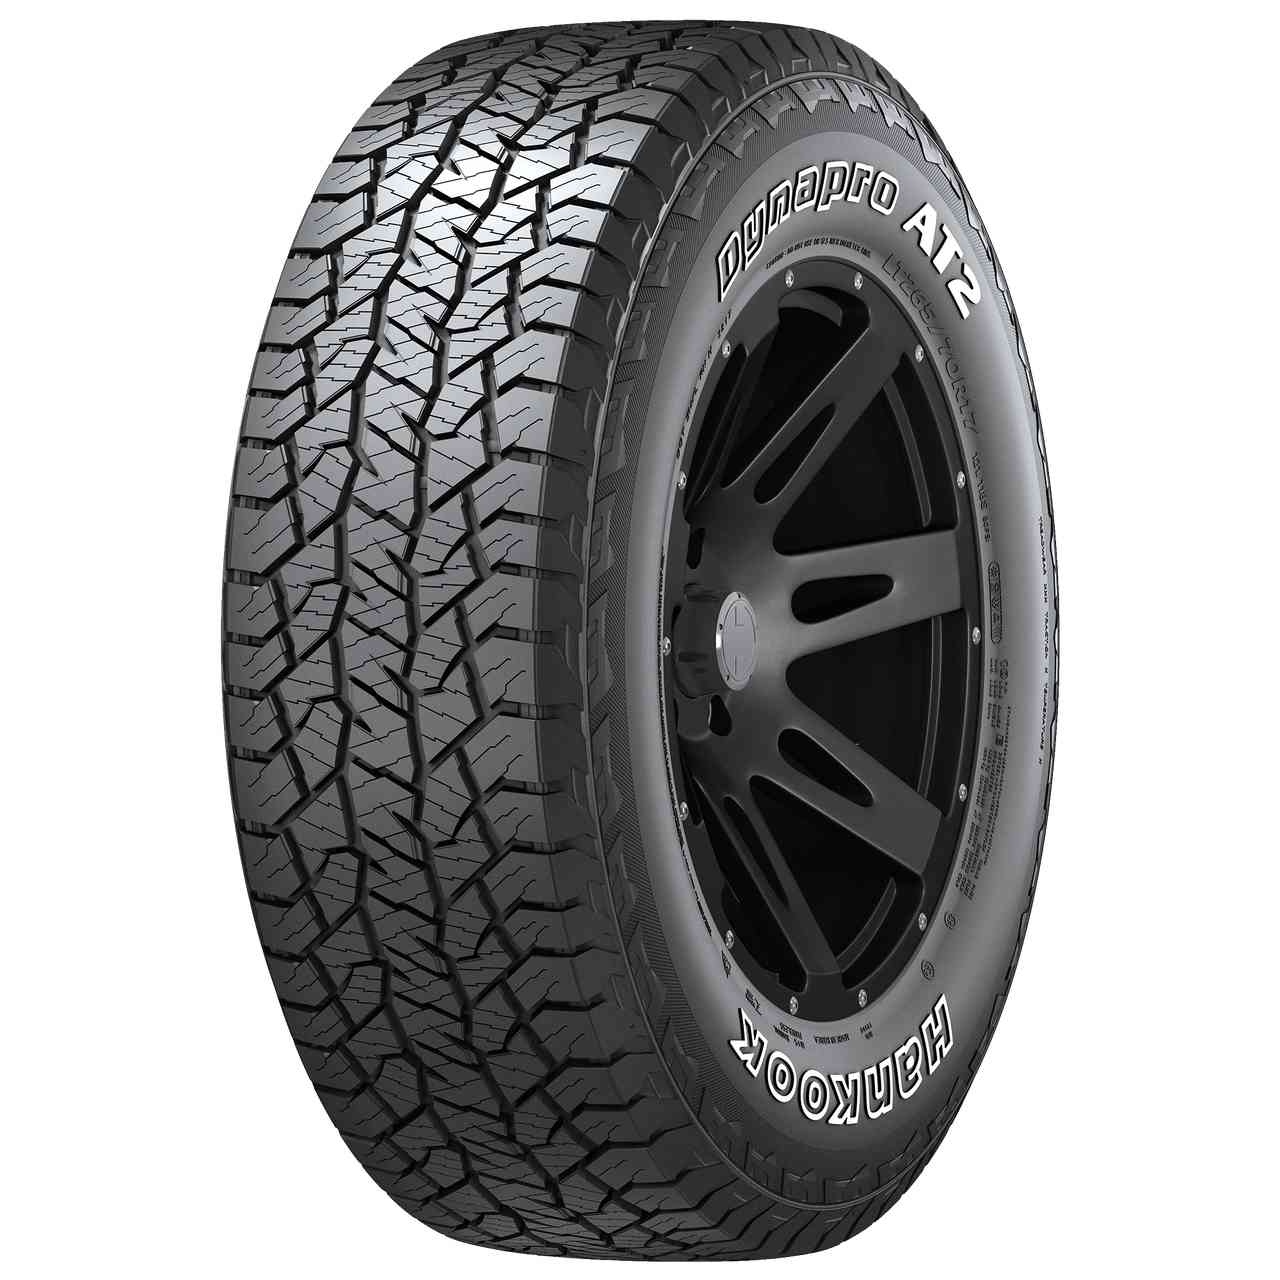 HANKOOK DYNAPRO AT2 (RF11) 30/9.50R15 104S BSW